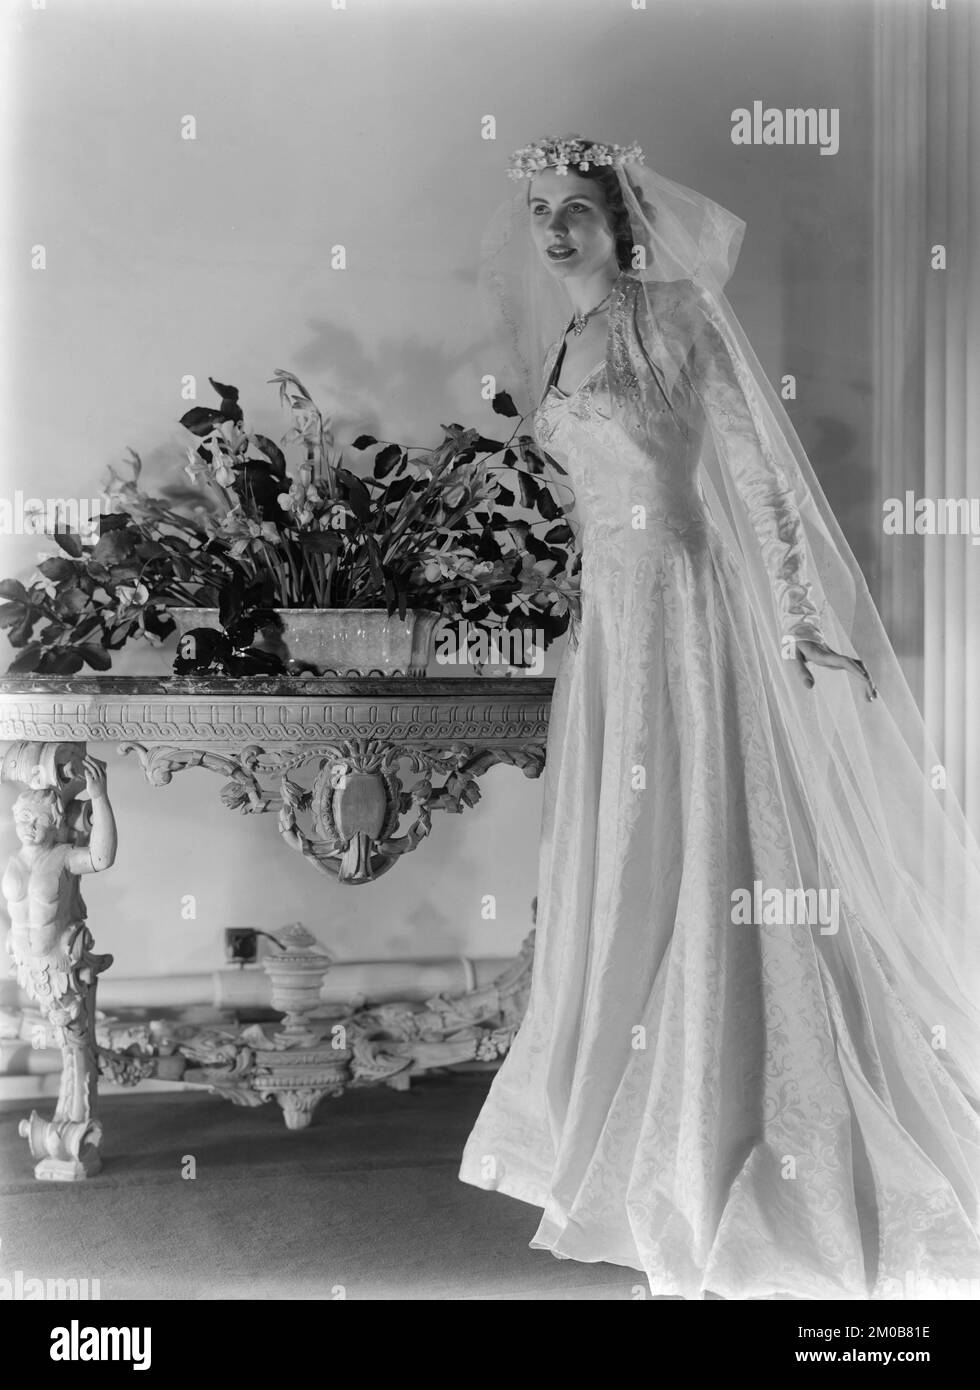 A model working for the Alexandrine Fashion and Model House in Nottingham, England, during the 1950s. She is posing in a studio, wearing one of Alexadrine's latest Wedding Dress designs. Stock Photo